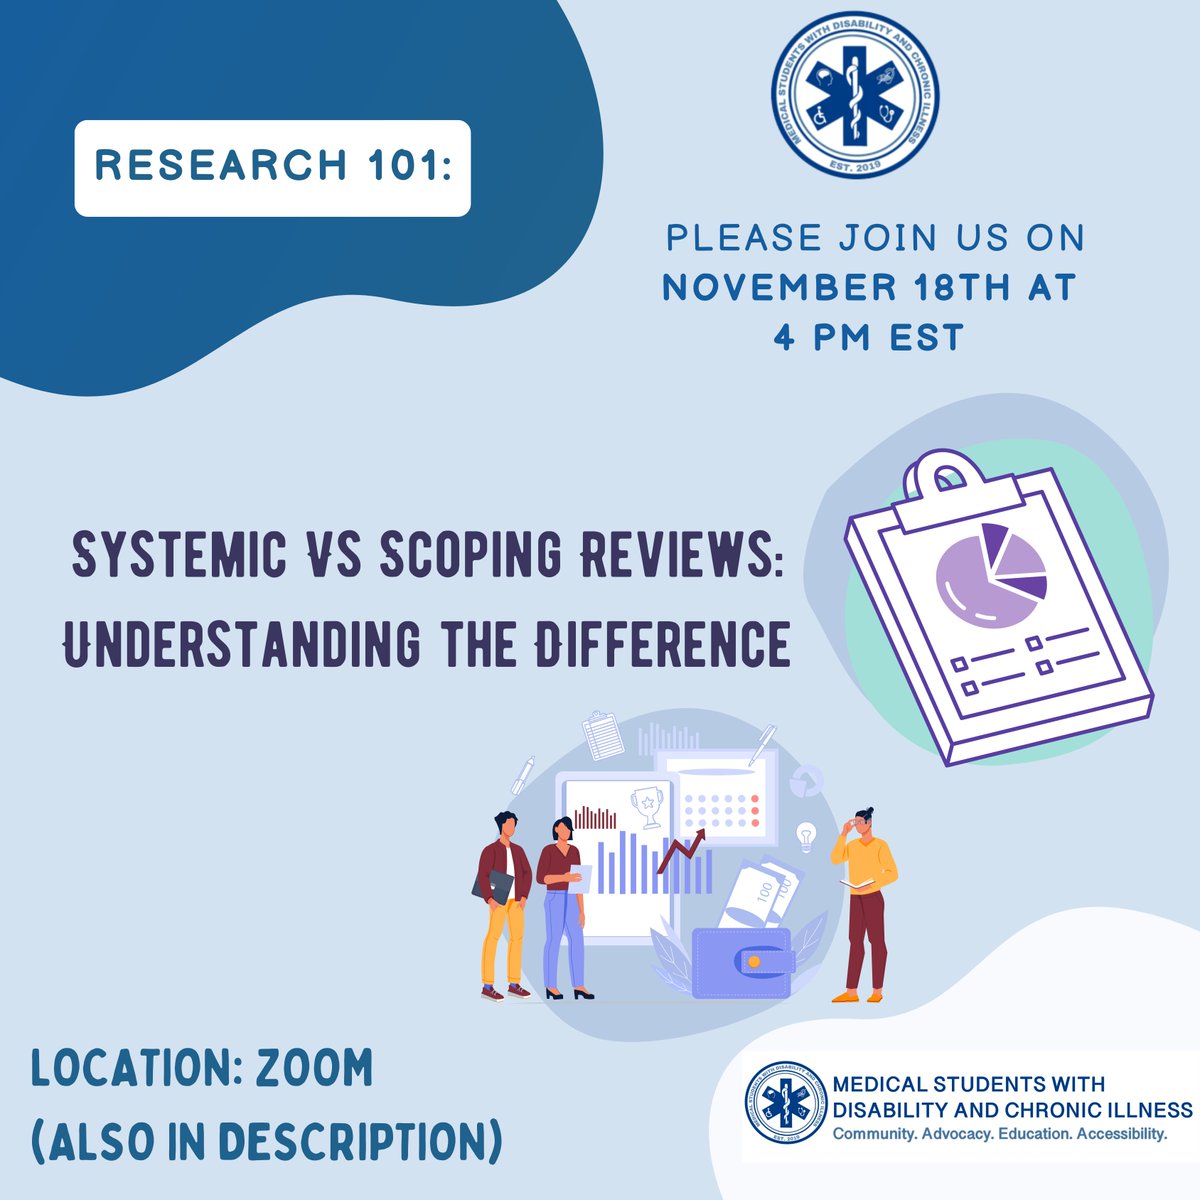 Join MSDCI's Research 101 workshop!
Nov 18, 2023.
4pm ET. Zoom.

Led by our Director of Research, Catherine Stratton, this workshop covers 'Systematic vs Scoping Reviews: Understanding the Difference.'
Zoom link: rb.gy/xx42tn

#DisabilityResearch #MedEd #DisabledInSTEM